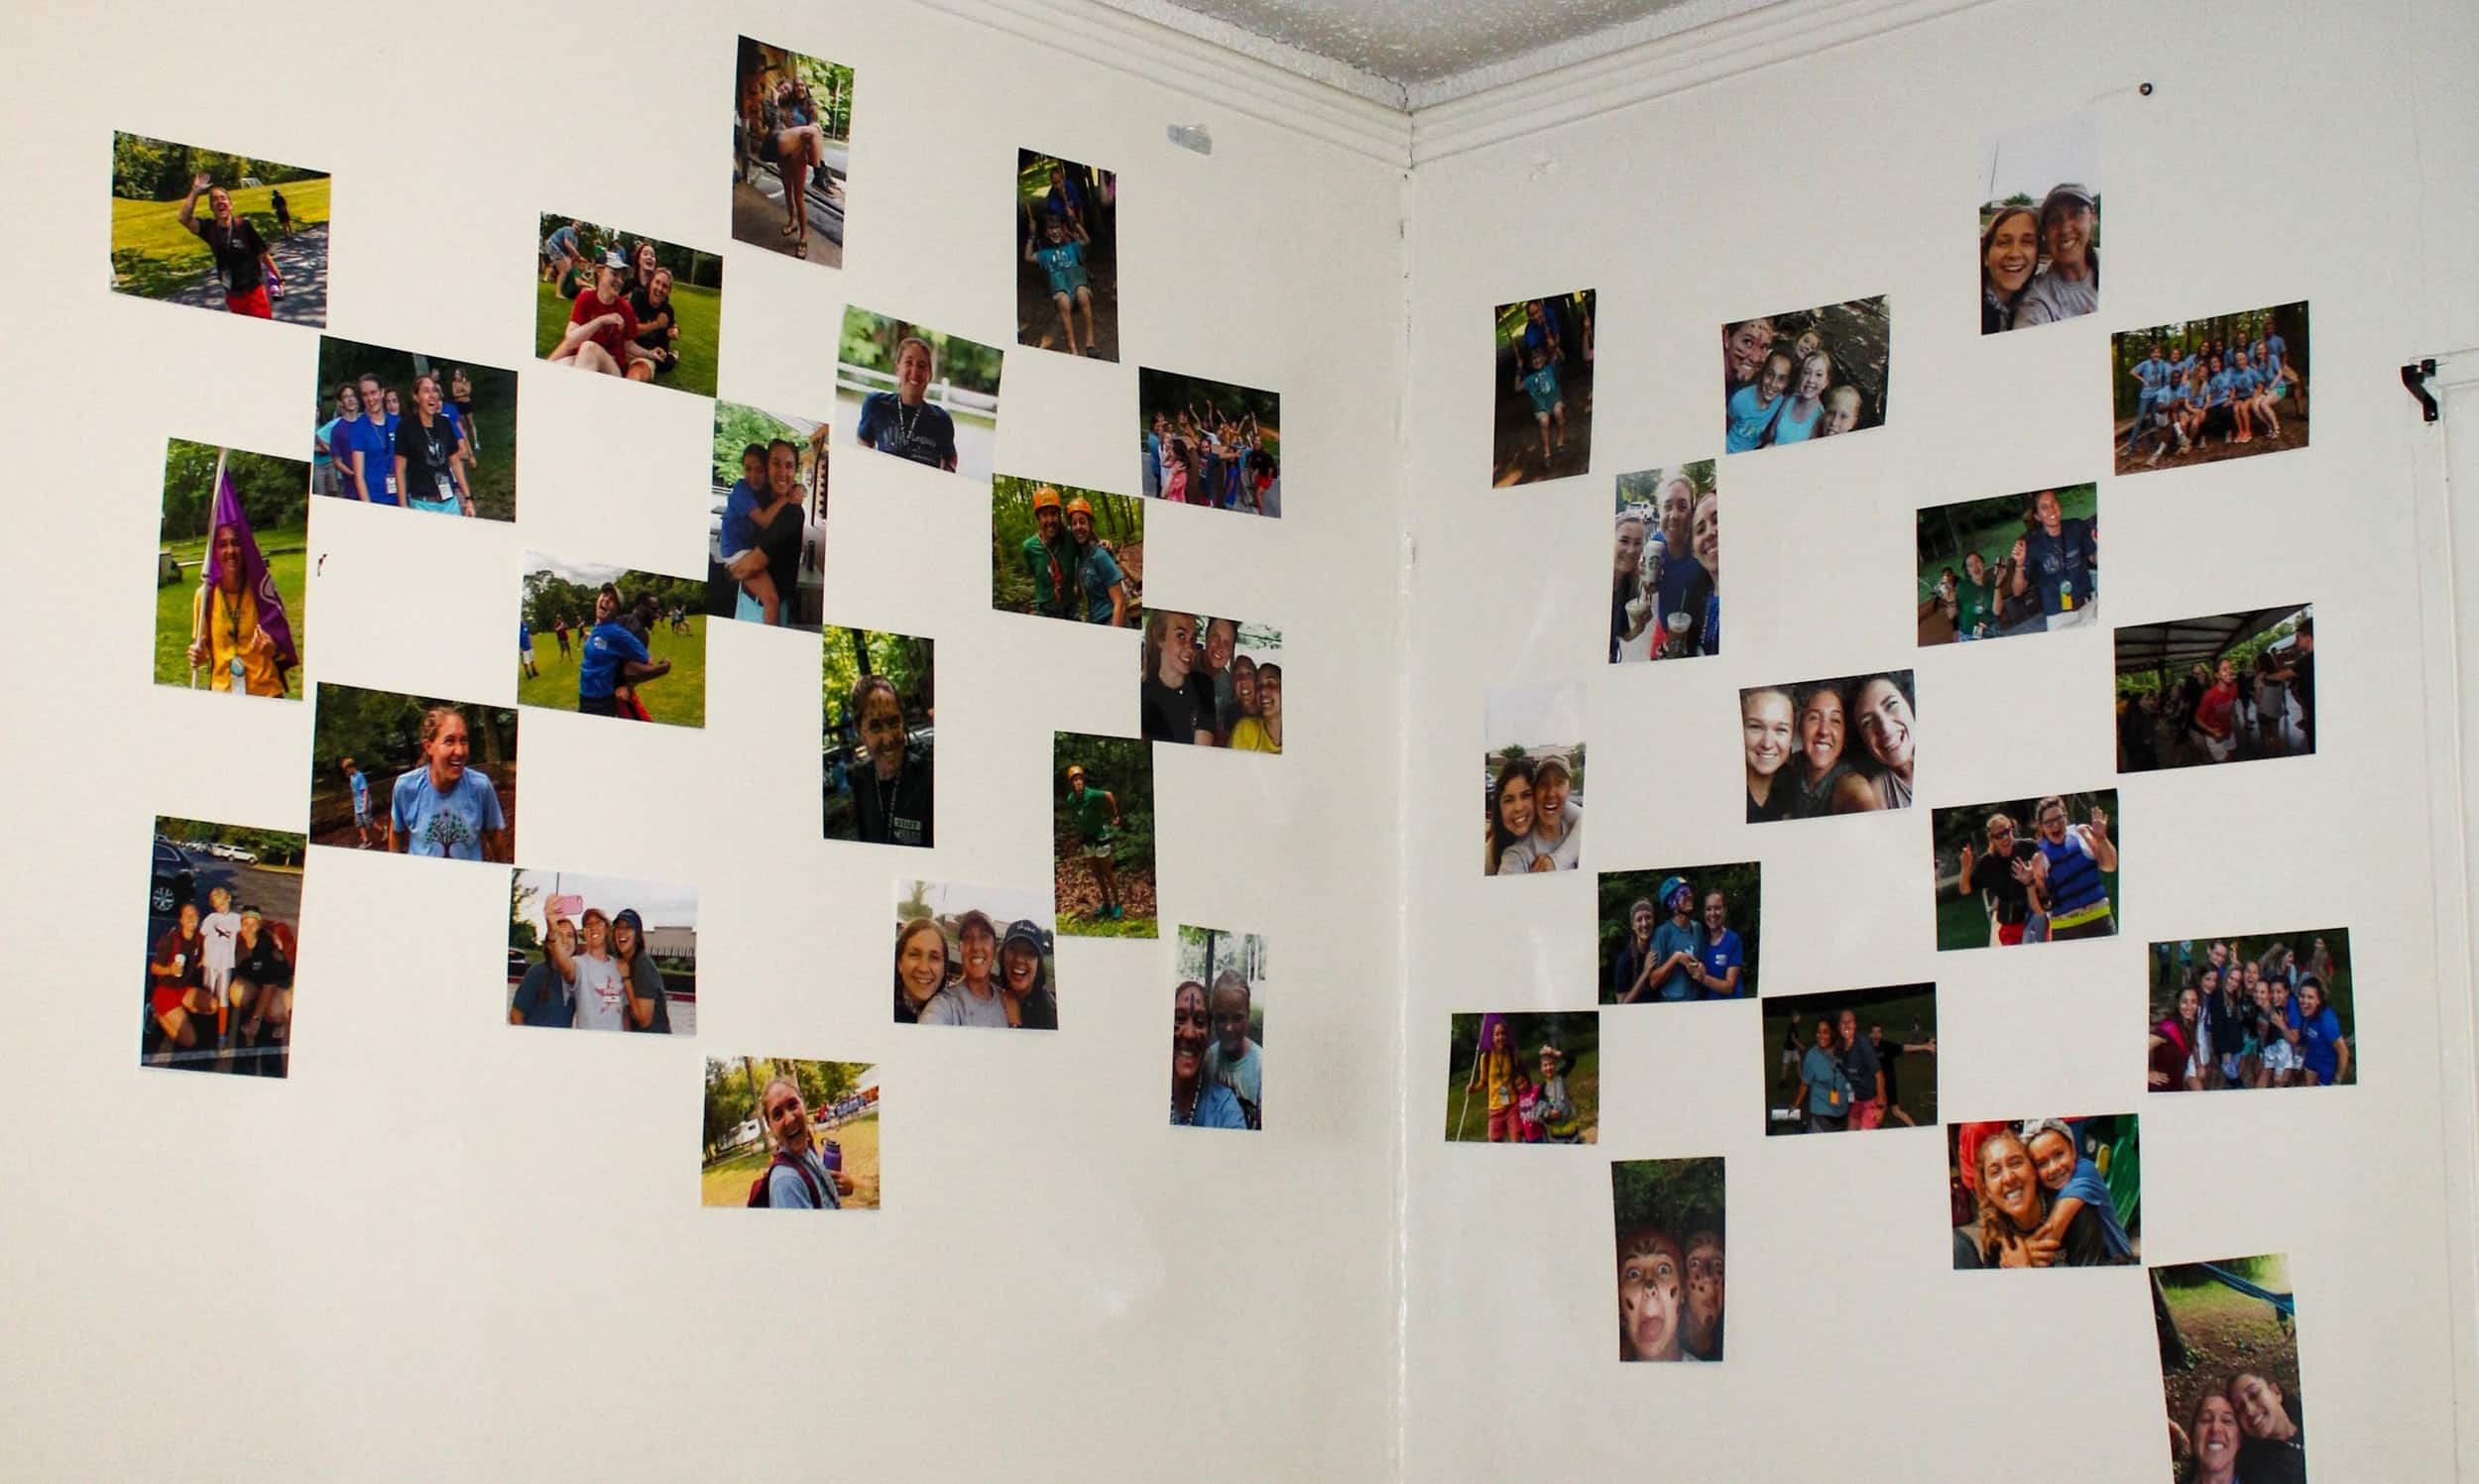 Savannah Hallman, senior, decorates her walls with pictures of her and her friends.